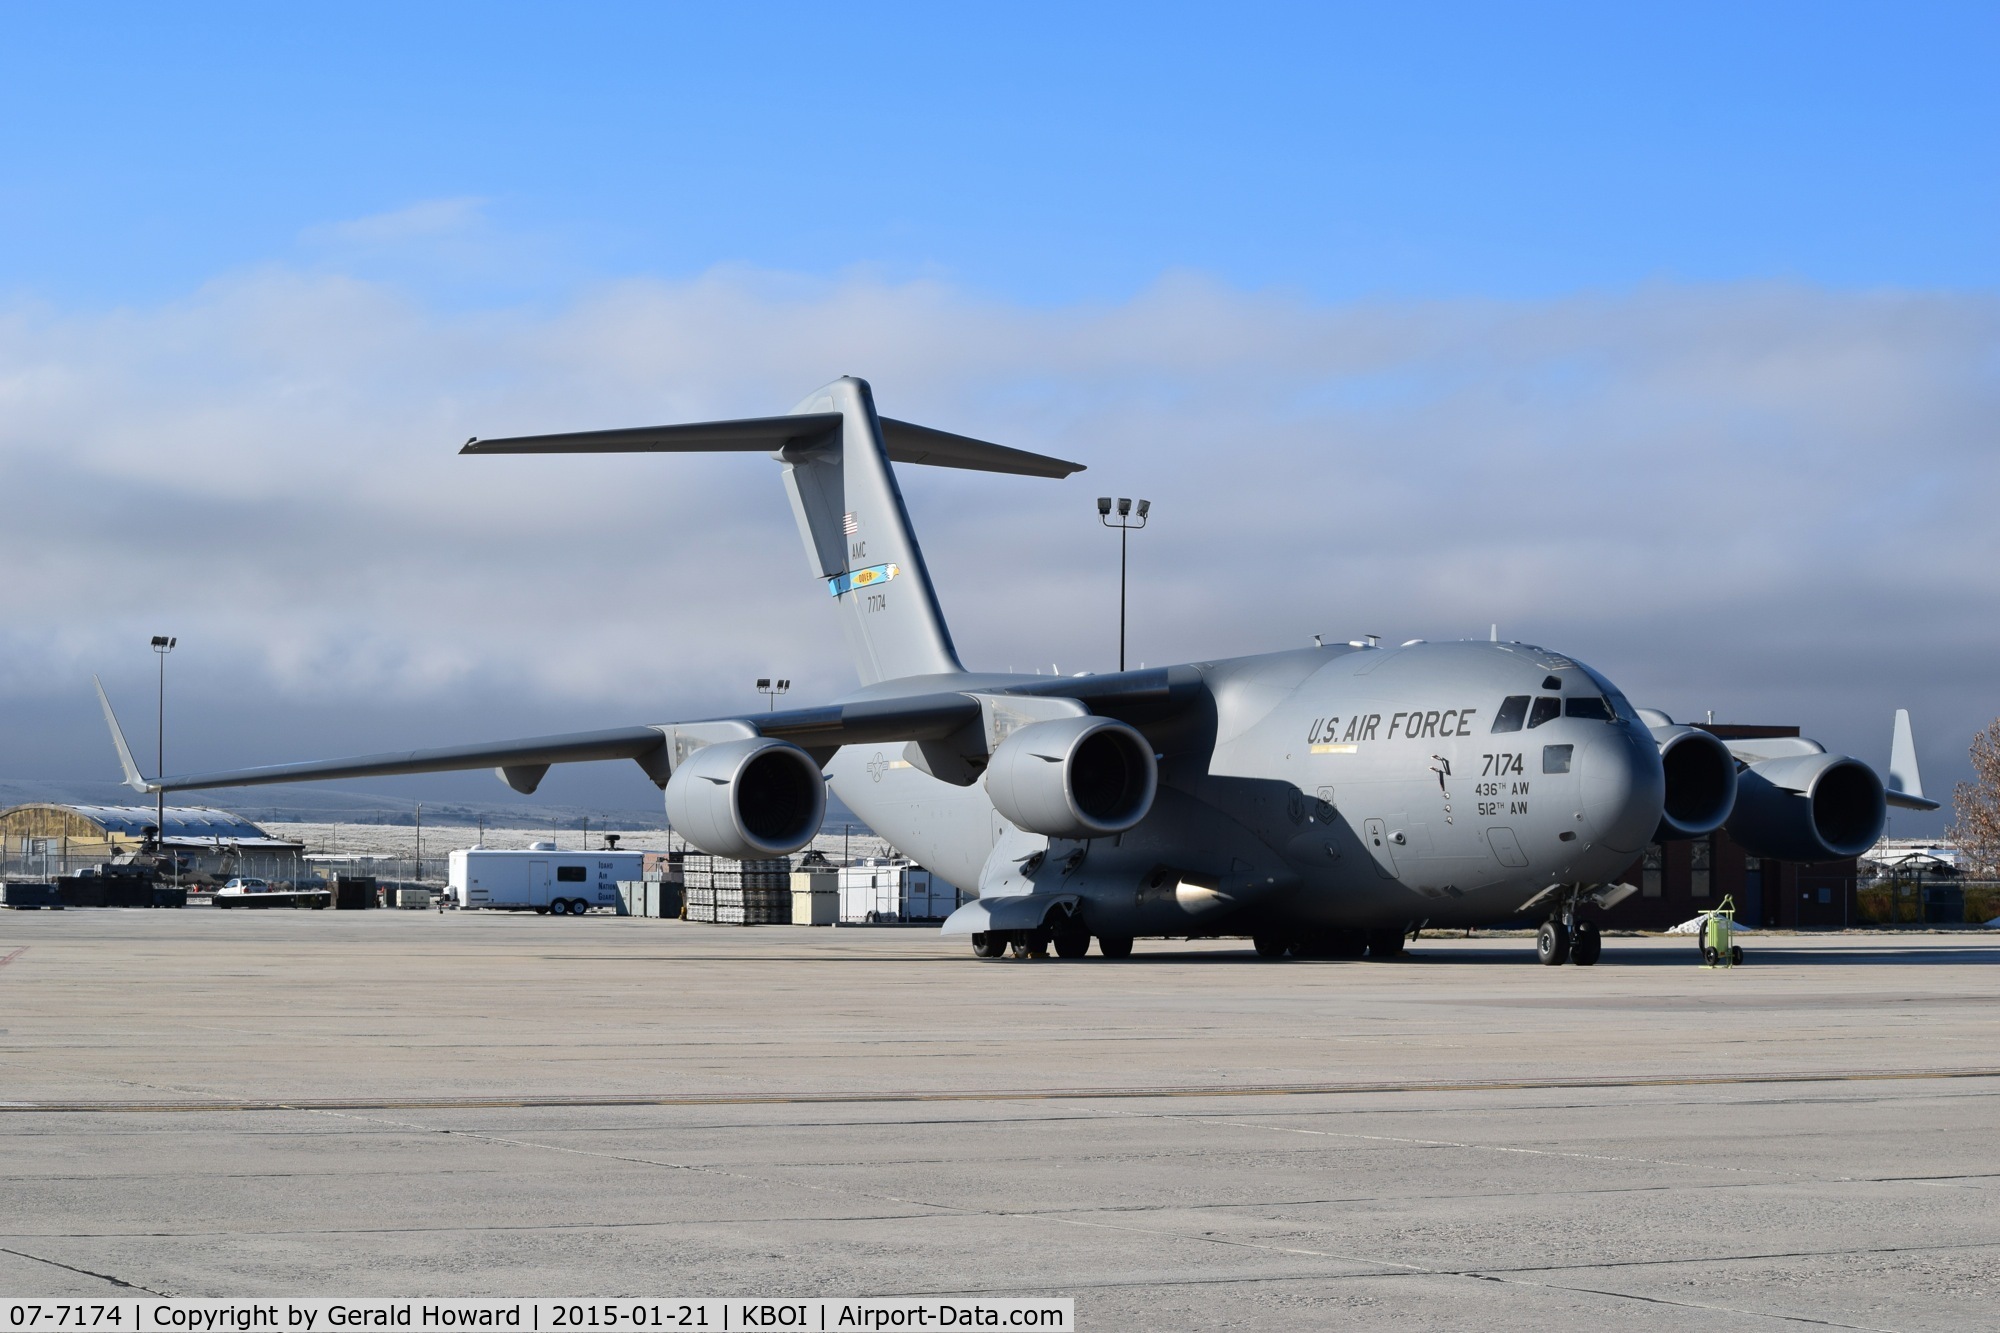 07-7174, 2007 Boeing C-17A Globemaster III C/N F-191/P-174, 436th AW, Dover AFB. Support aircraft for presidential visit.